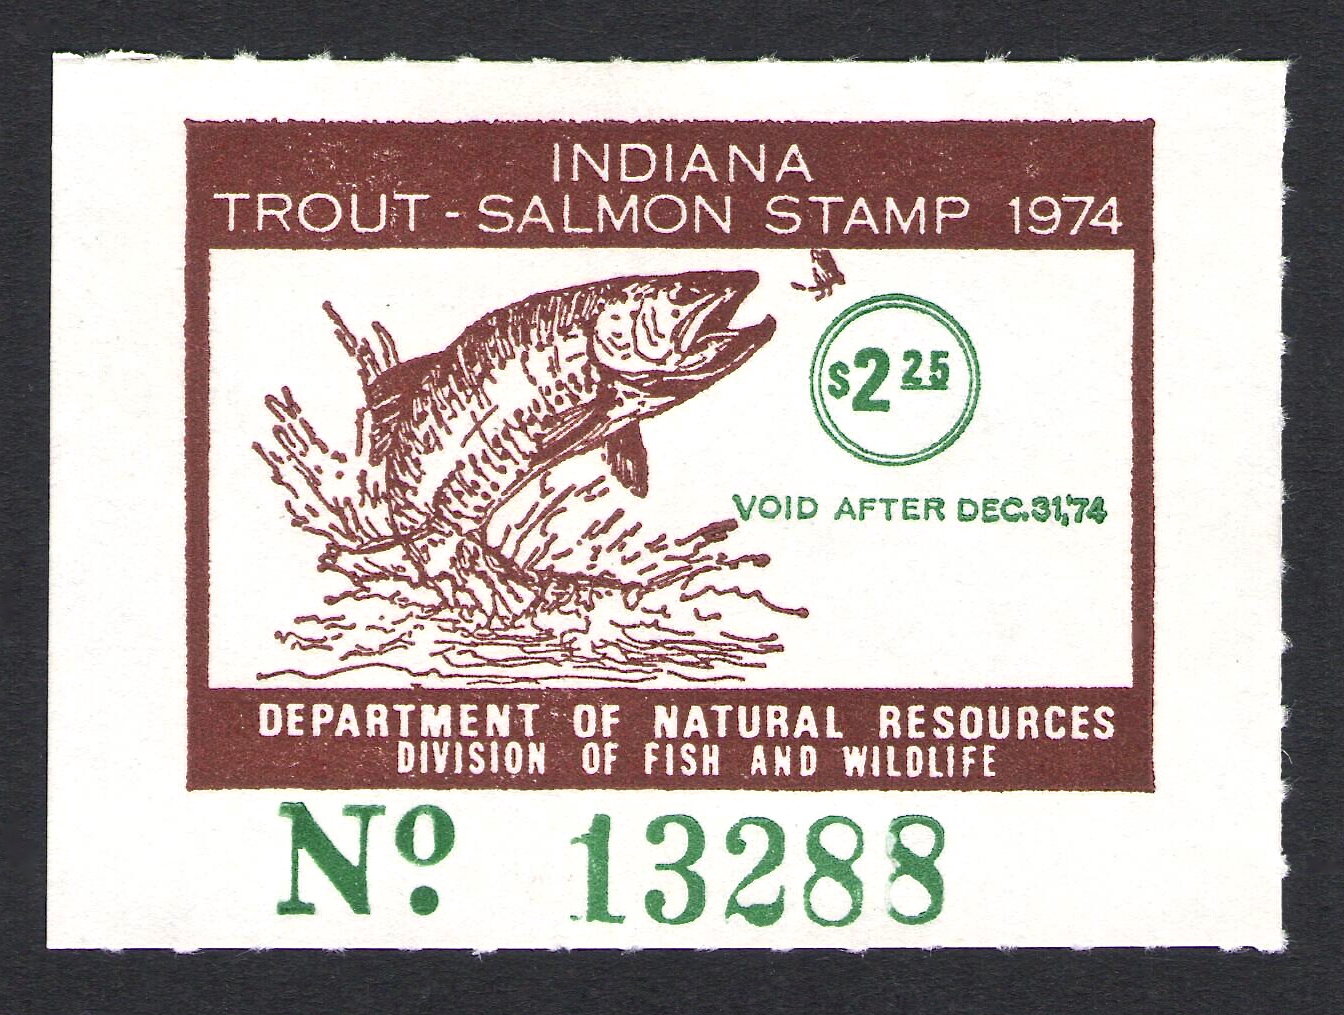 1974 Indiana Trout